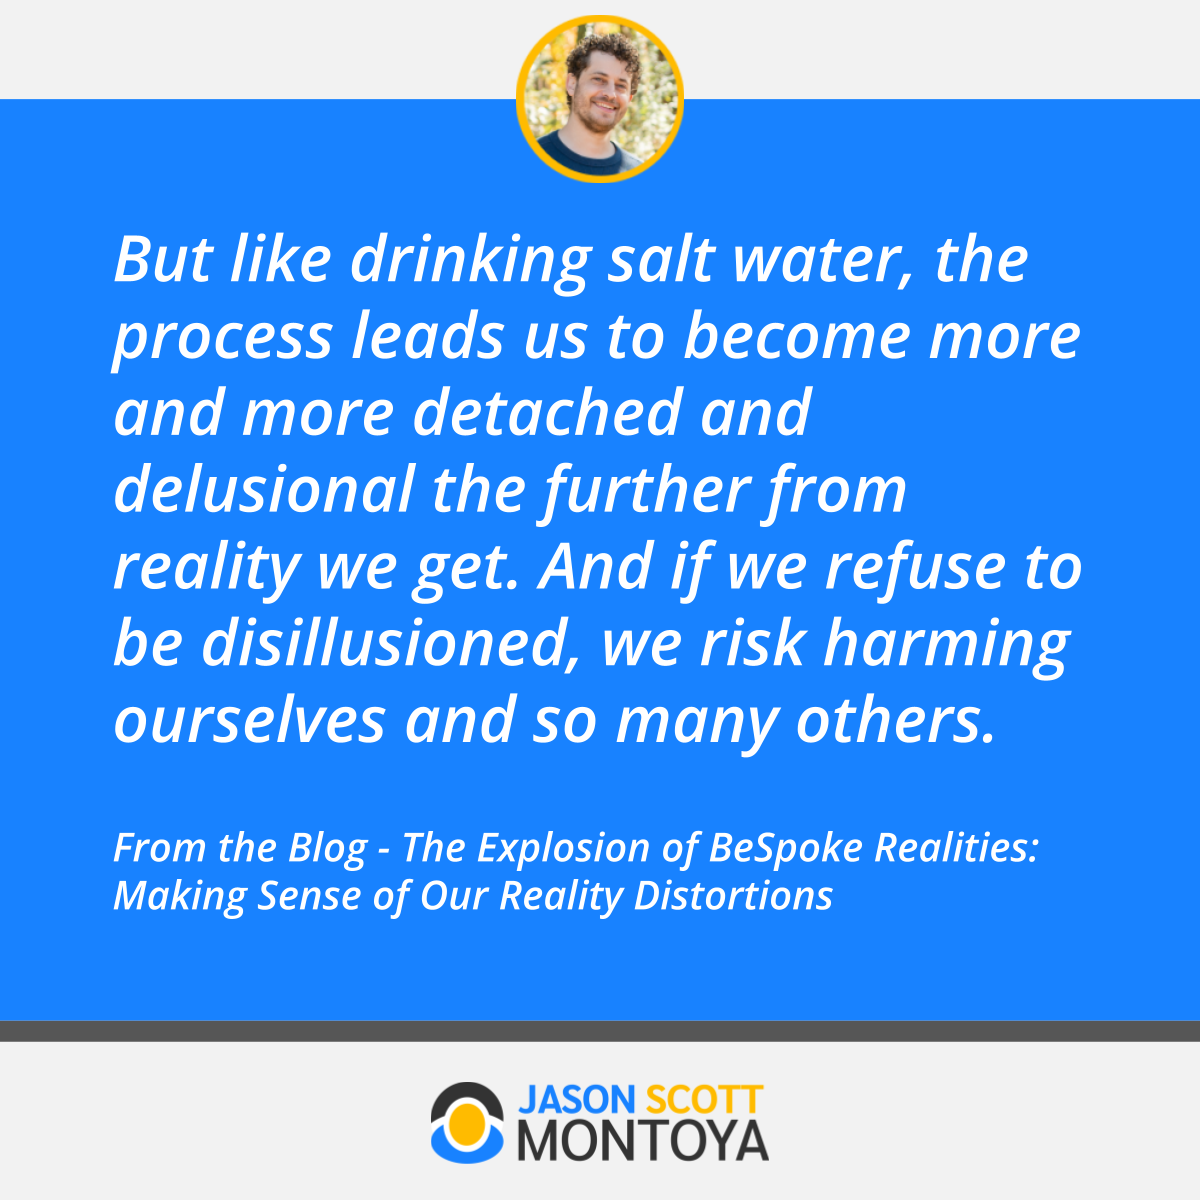 But like drinking salt water, the process leads us to become more and more detached and delusional the further from reality we get. And if we refuse to be disillusioned, we risk harming ourselves and so many others.  From the Blog - The Explosion of BeSpoke Realities: Making Sense of Our Reality Distortions